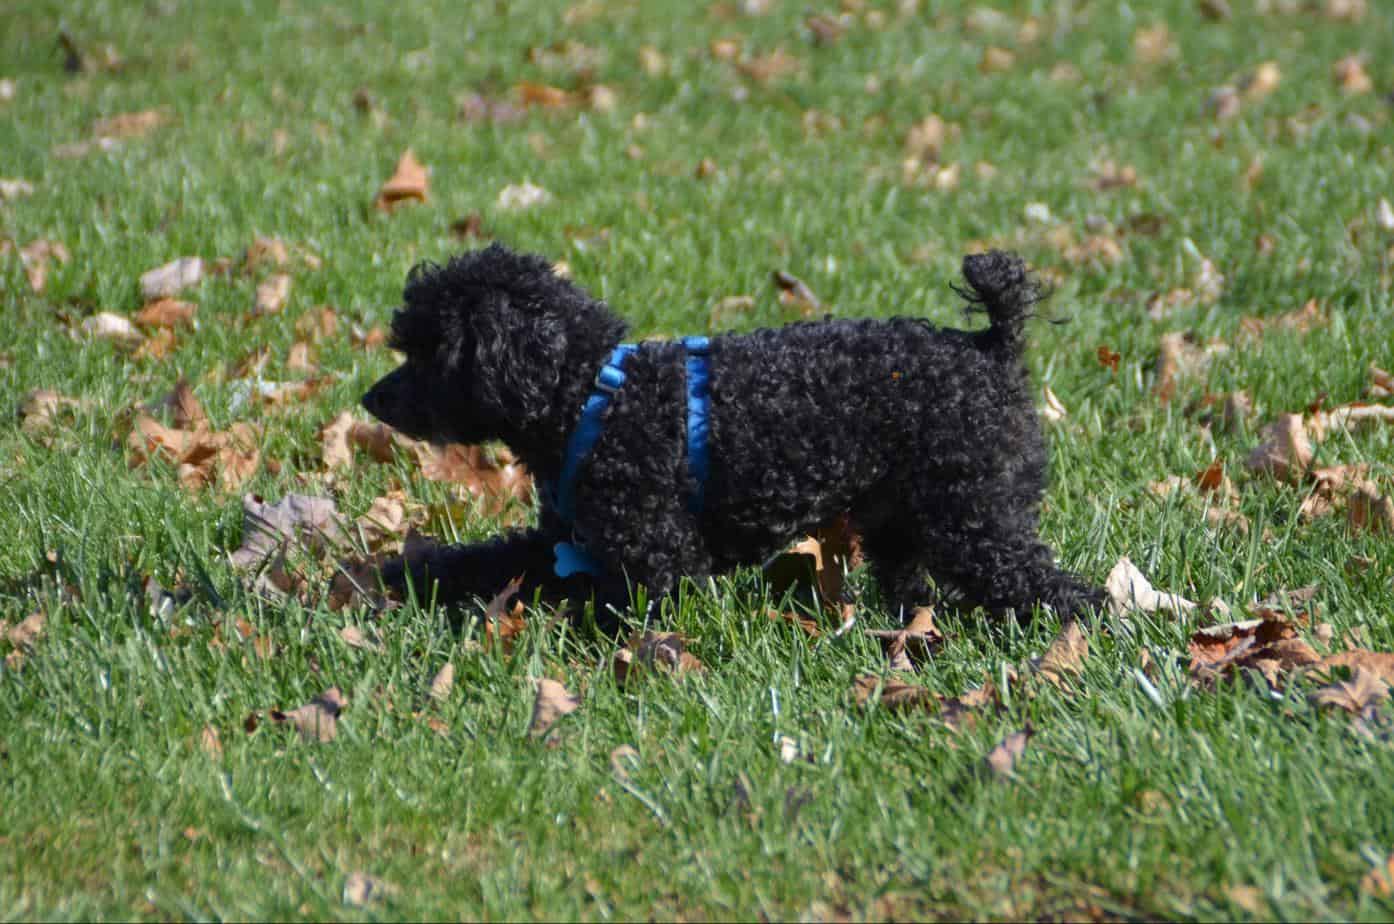 micro poodle full size